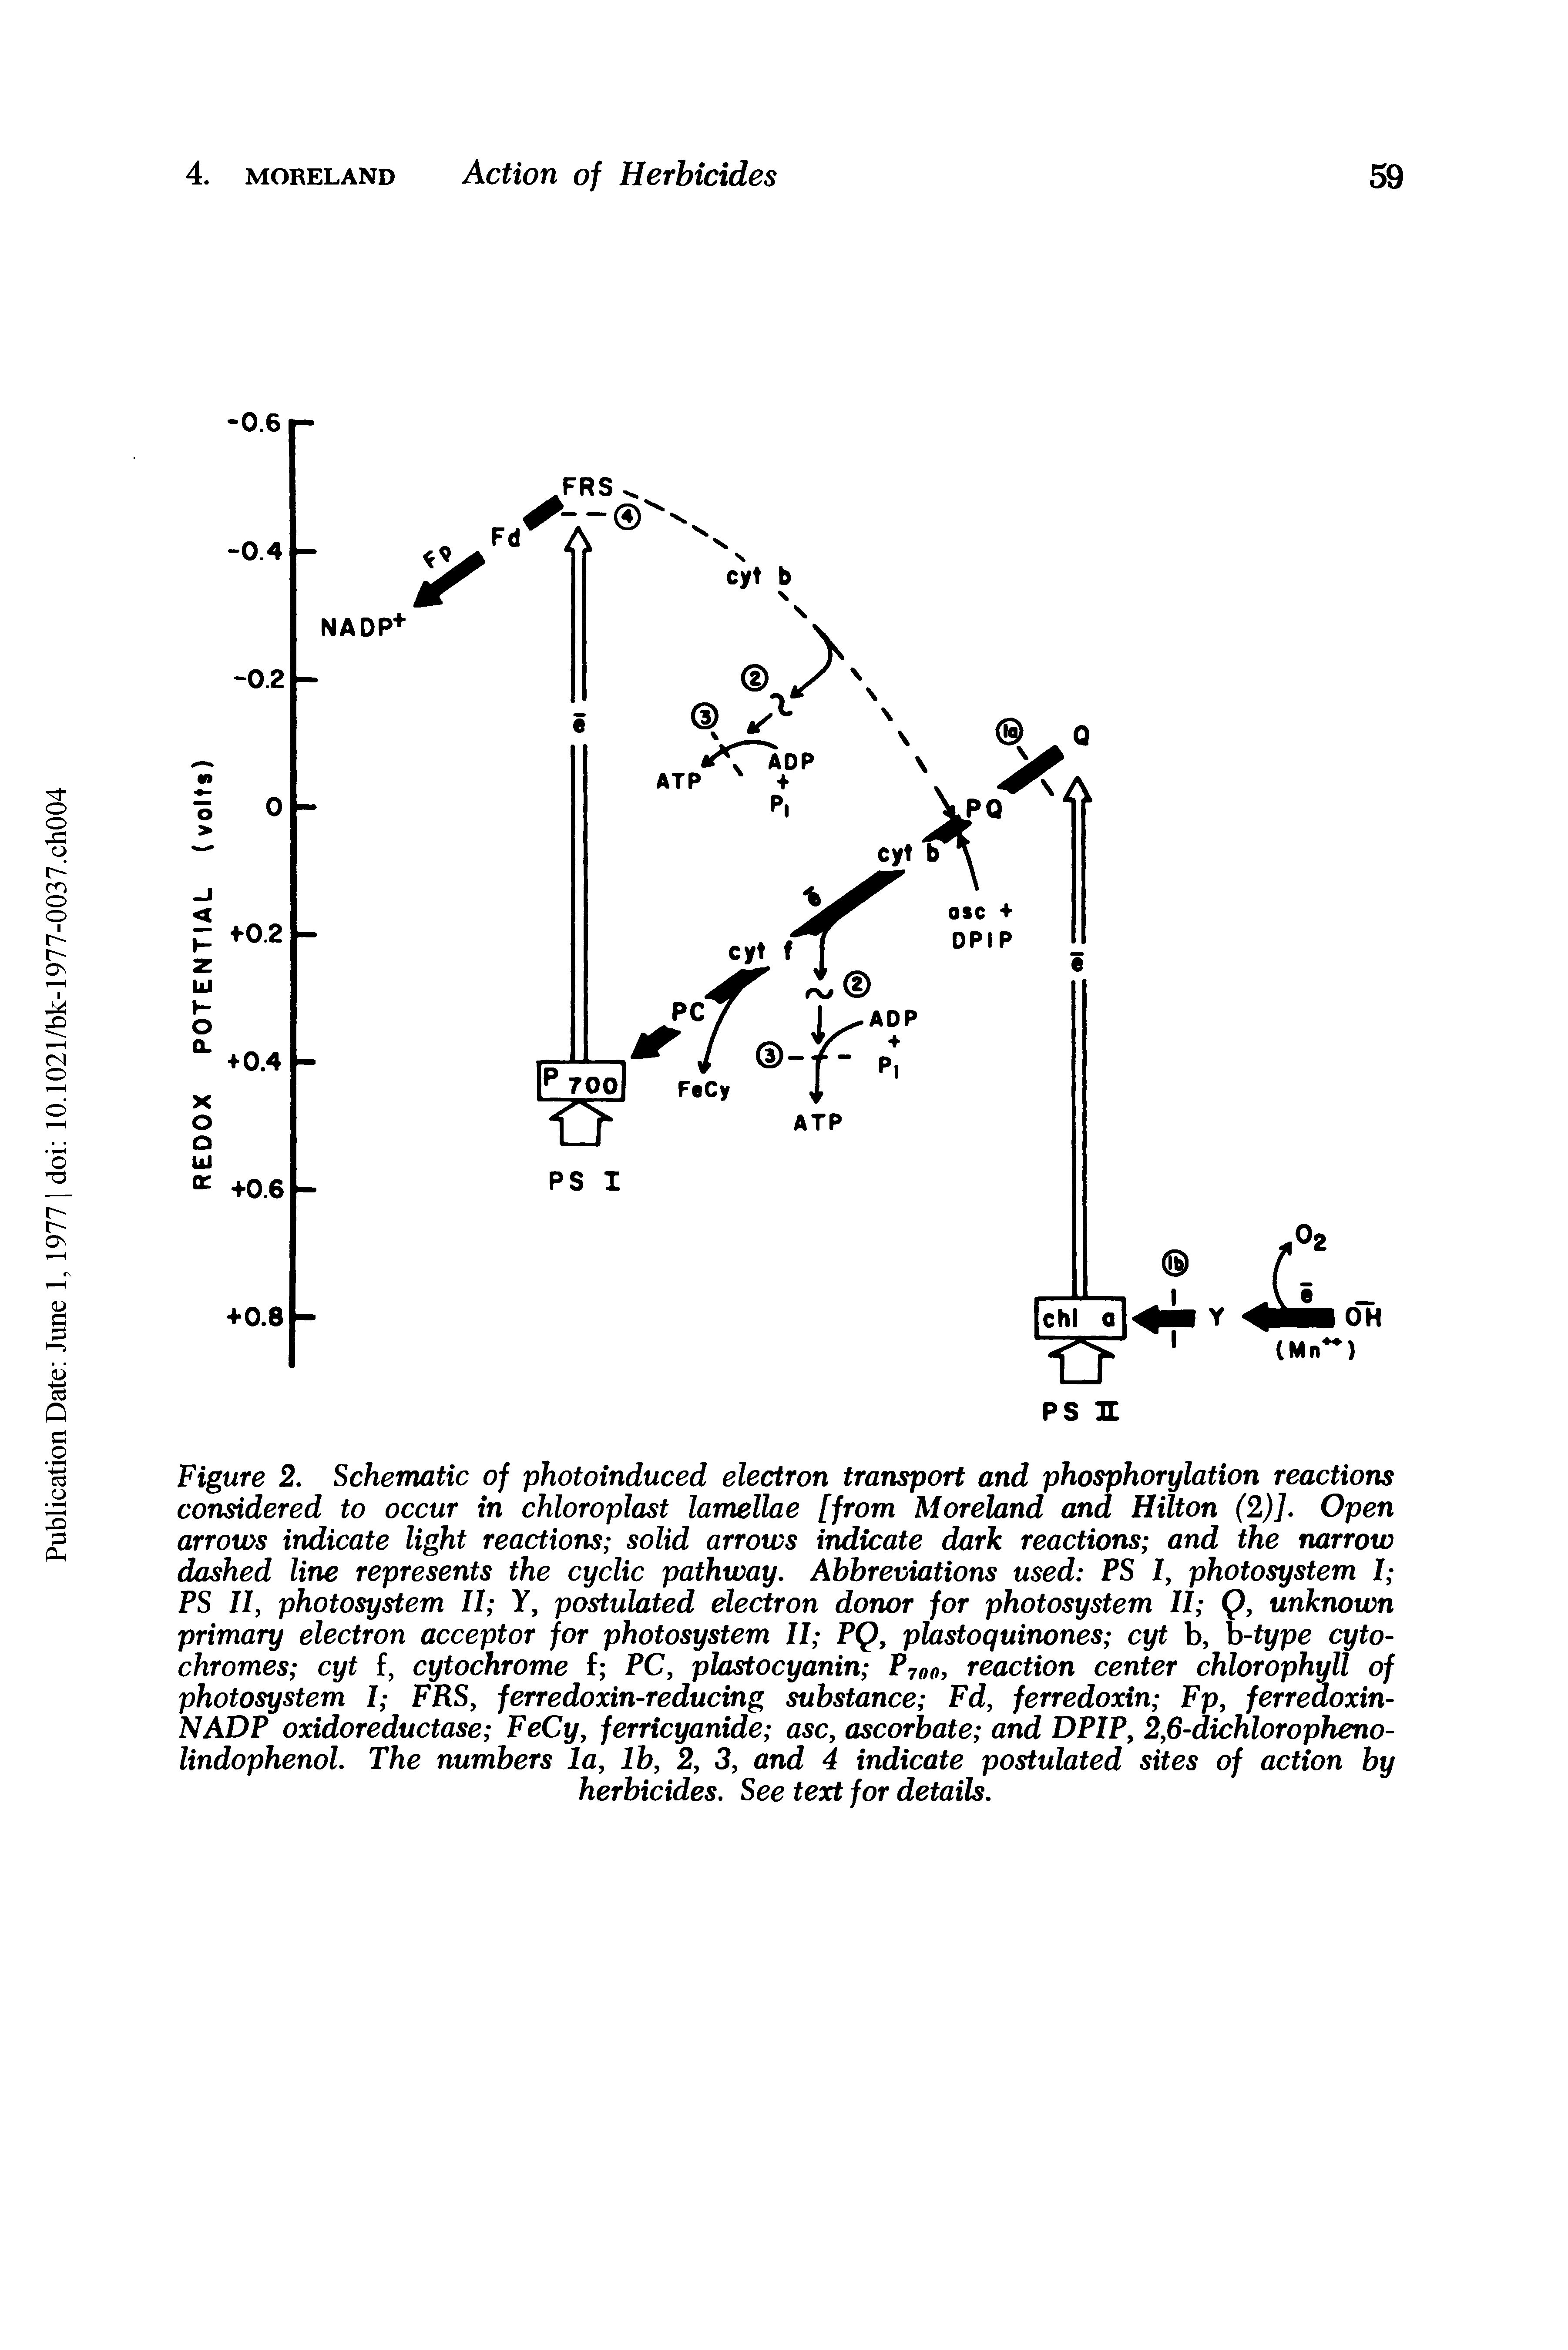 Figure 2. Schematic of photoinduced electron transport and phosphorylation reactions considered to occur in chloroplast lamellae [from Moreland and Hilton (2)]. Open arrows indicate light reactions solid arrows indicate dark reactions and the narrow dashed line represents the cyclic pathway. Abbreviations used PS I, photosystem I PS II, photosystem II Y, postulated electron donor for photosystem II Q, unknown primary electron acceptor for photosystem II PQ, plastoquinones cyt b, b-type cytochromes cyt f, cytochrome f PC, plastocyanin P700, reaction center chlorophyll of photosystem I FRS, ferredoxin-reducing substance Fd, ferredoxin Fp, ferredoxin-NADP oxidoreductase FeCy, ferricyanide asc, ascorbate and DPIP, 2,6-dichloropheno-lindophenol. The numbers la, lb, 2, 3, and 4 indicate postulated sites of action by...